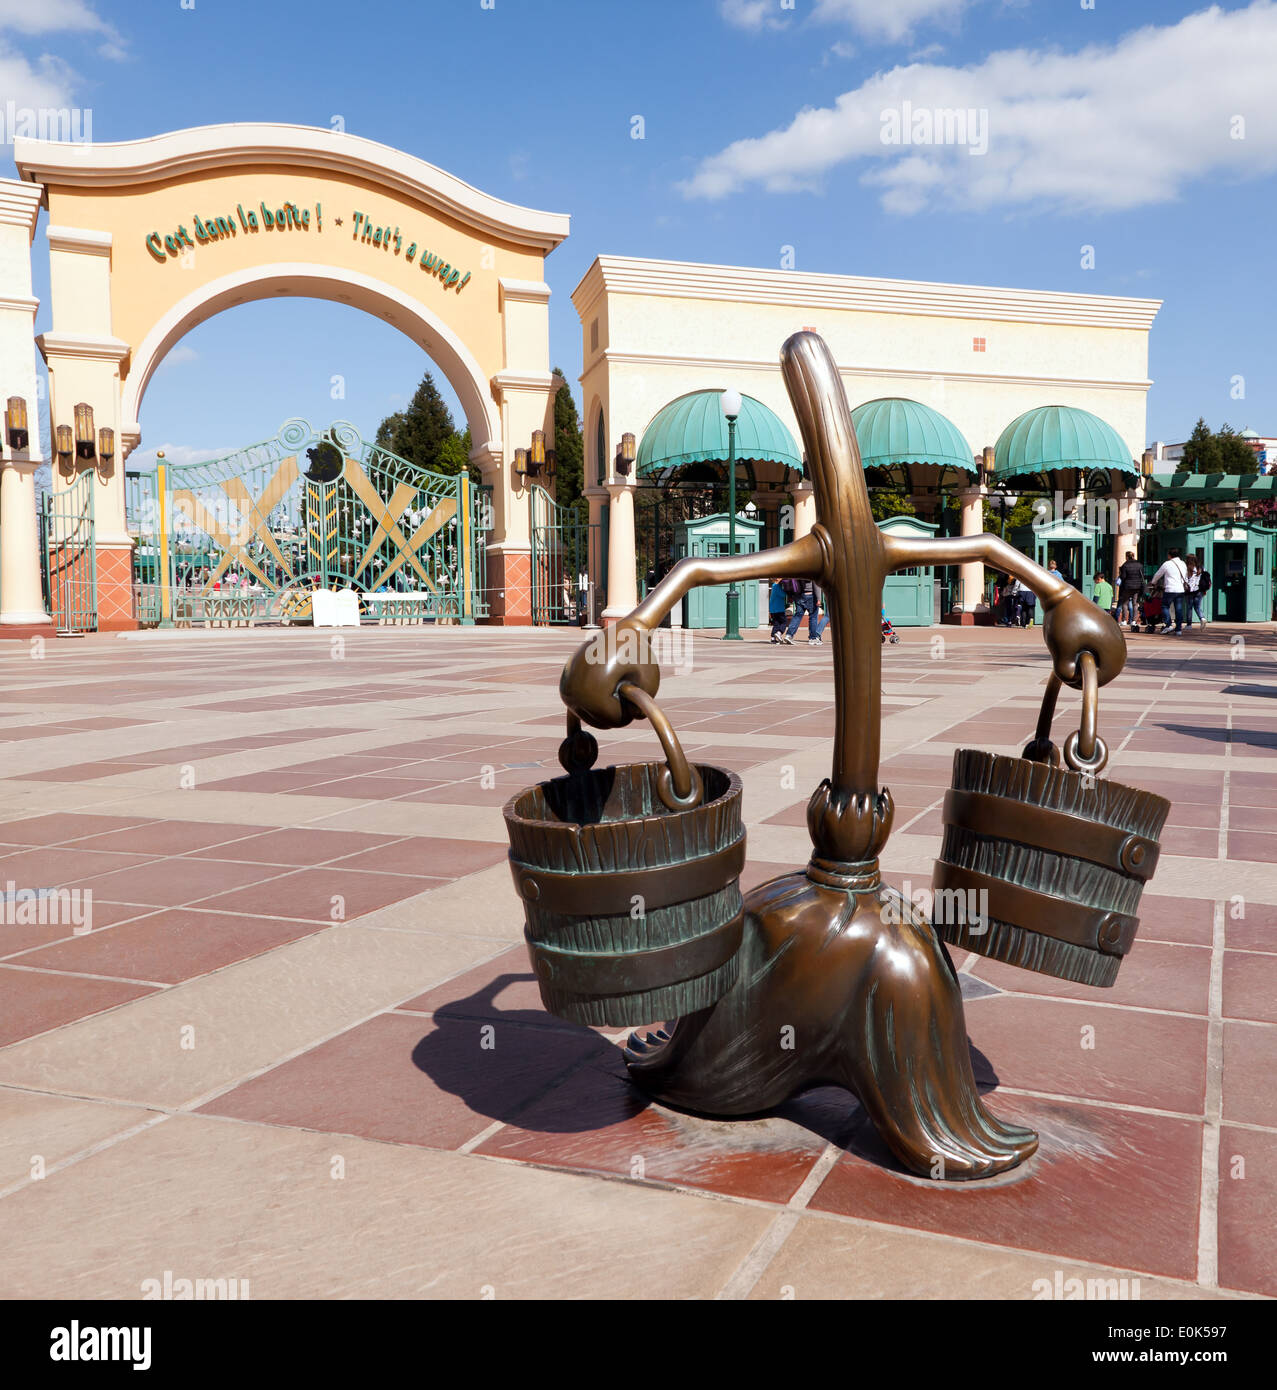 A Bronzes sculpture of one of the Magic Brooms, from  'The Sorcerer's Apprentice' segment of Disney's Fantasia Film Stock Photo